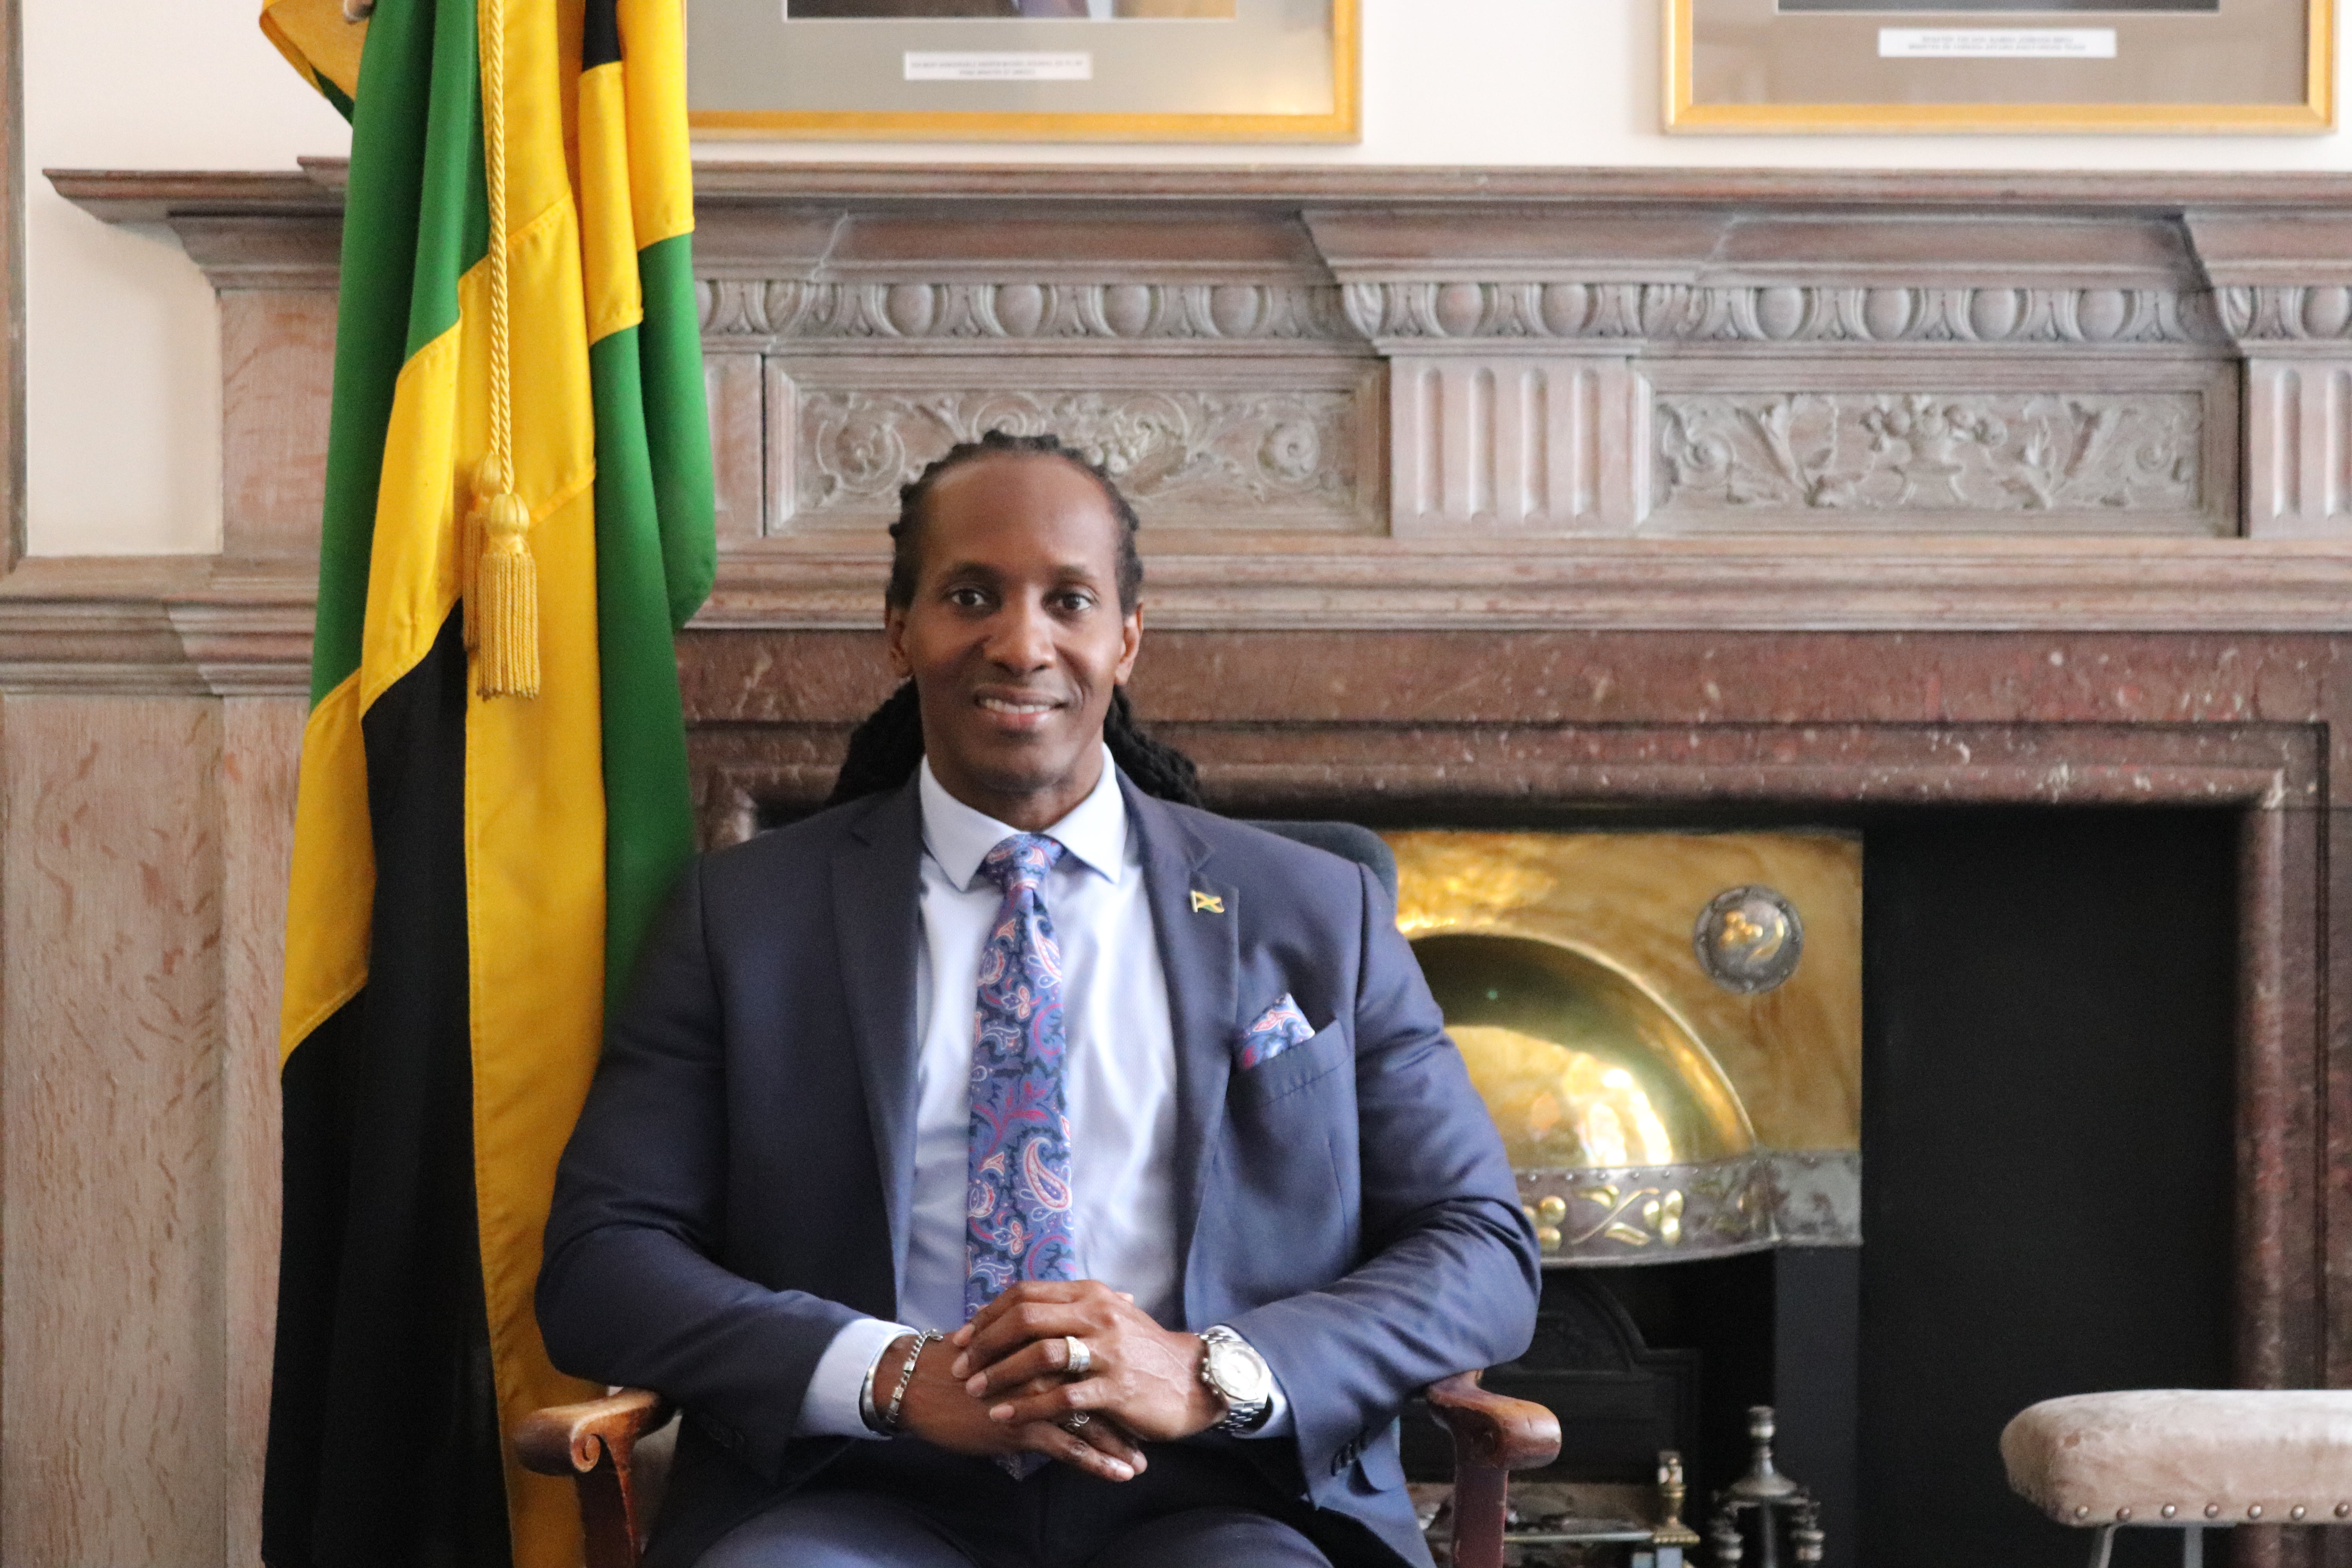 Alando Terrelonge, a member of parliament and state minister, said the nation is gearing towards becoming a republic after more than 350 years of colonial rule